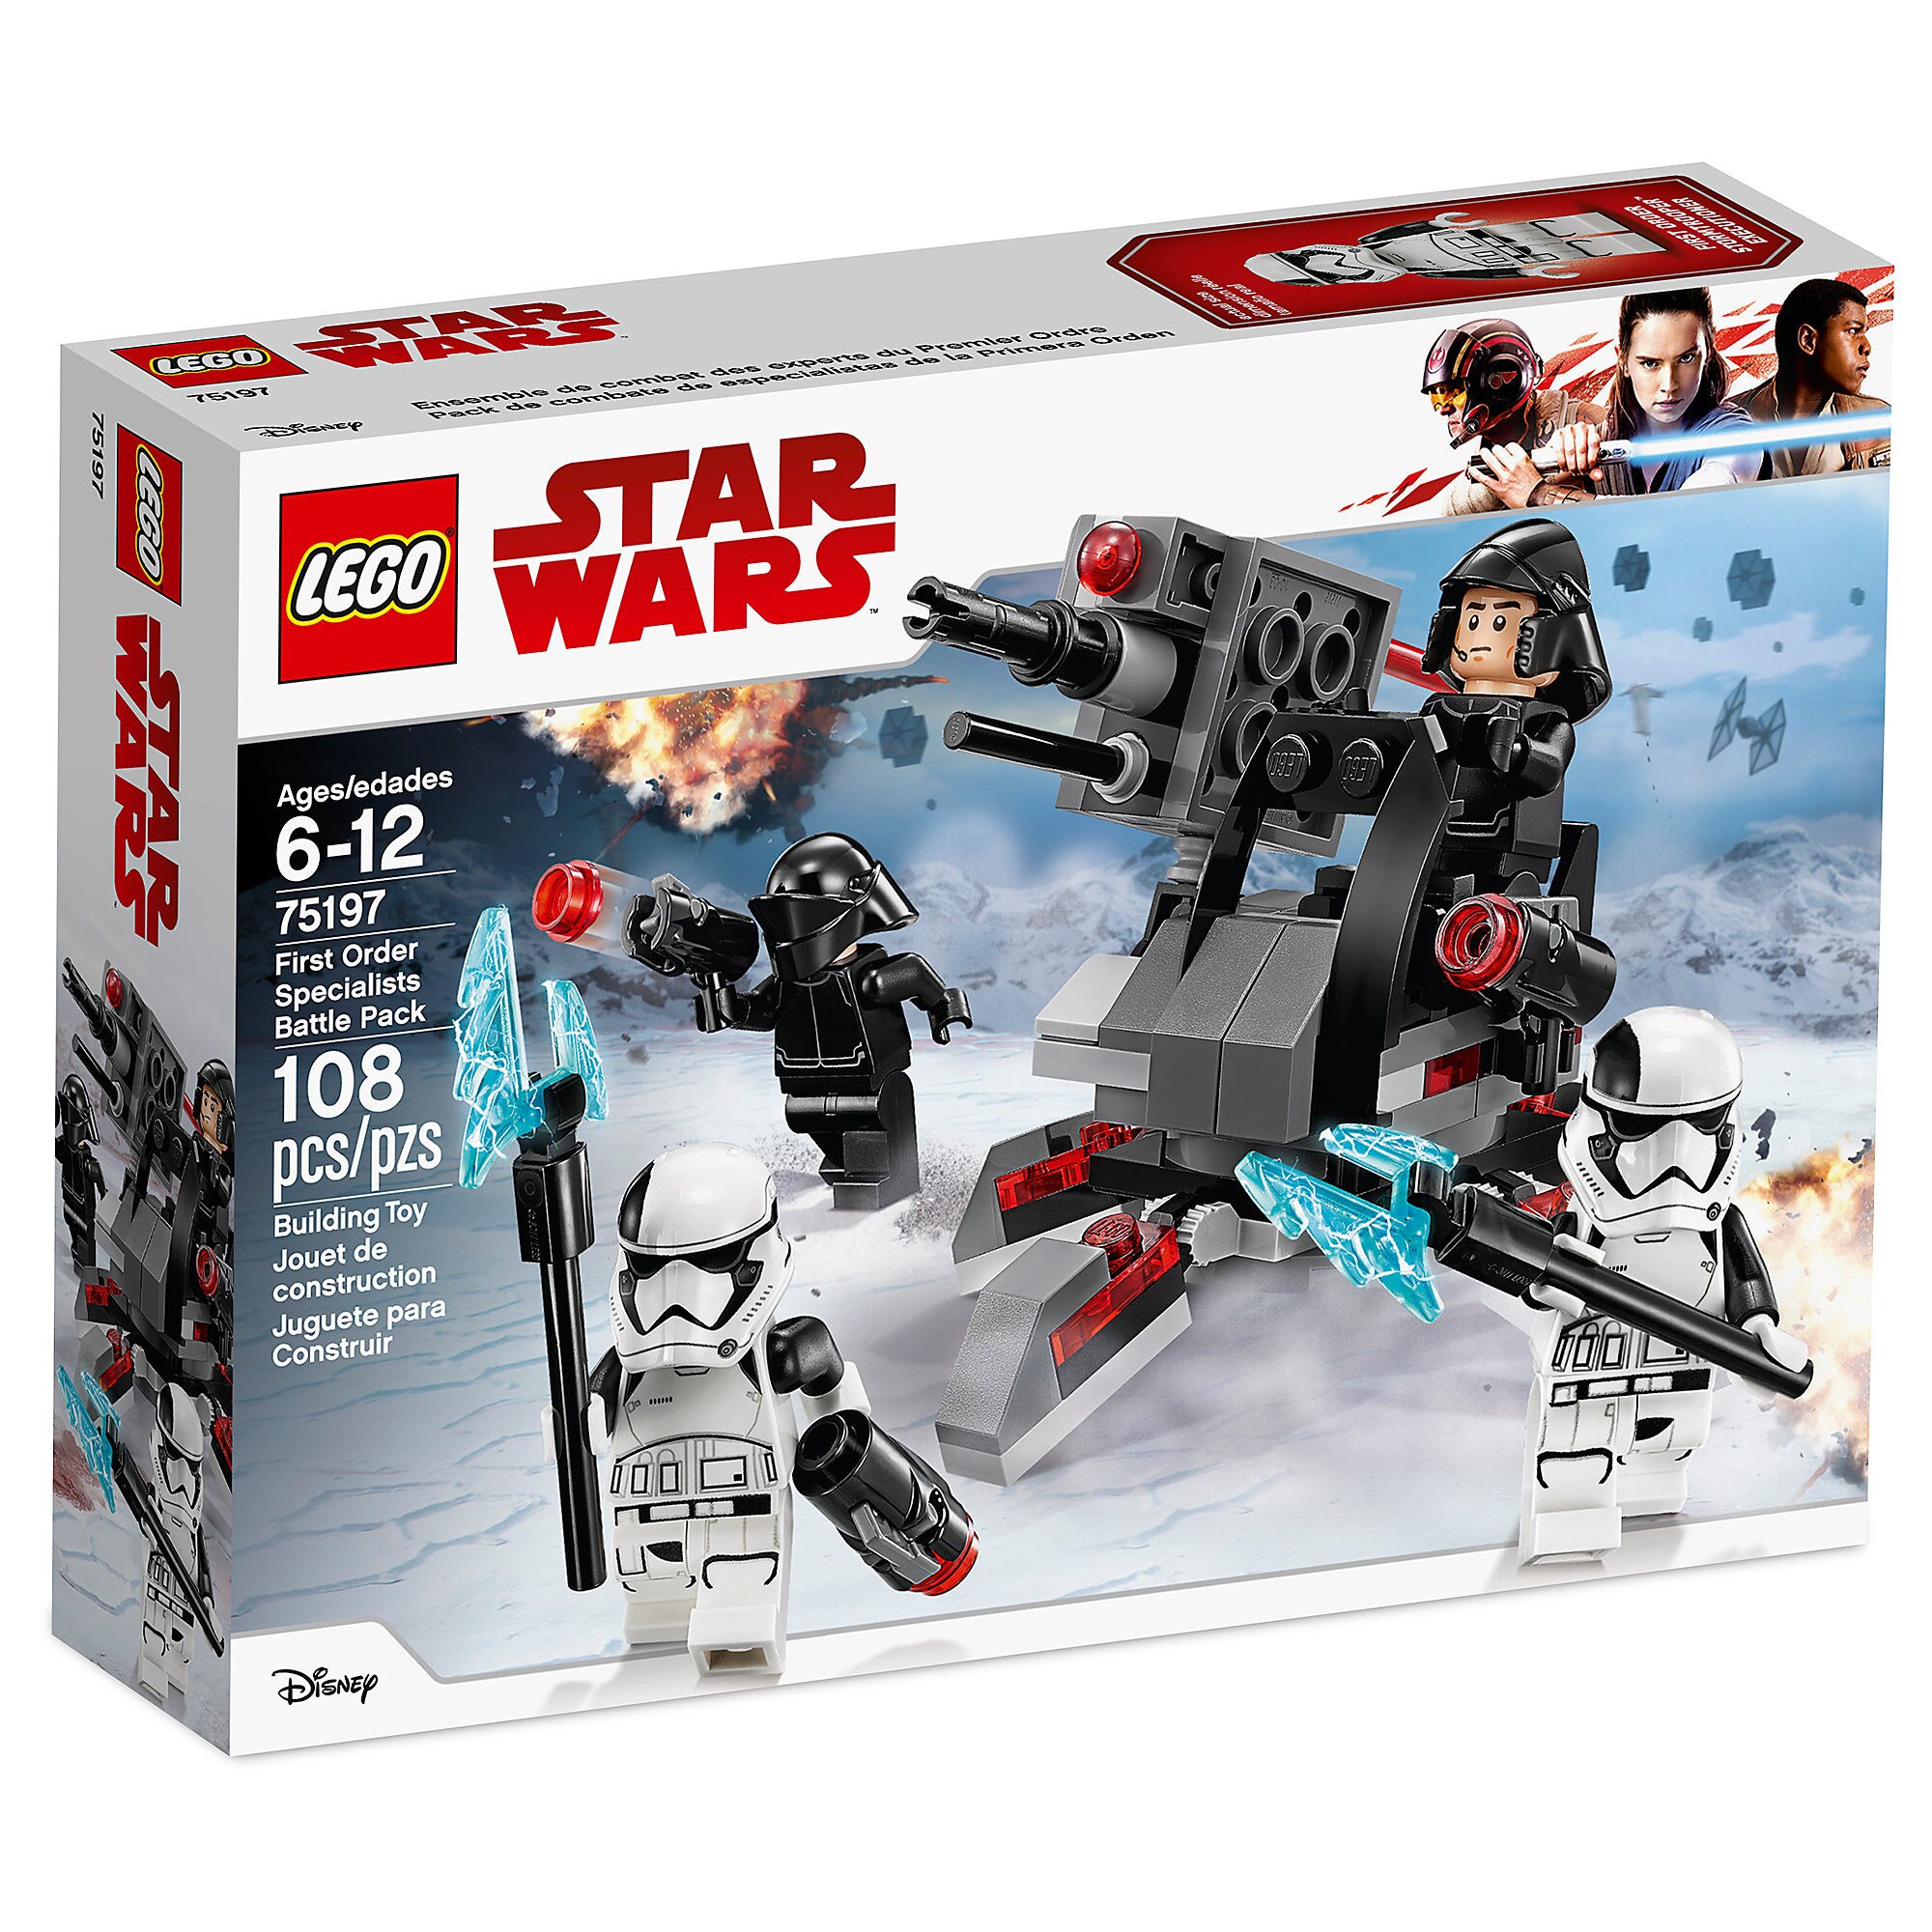 First Order Specialists Battle Pack by LEGO - Star Wars: The Last Jedi